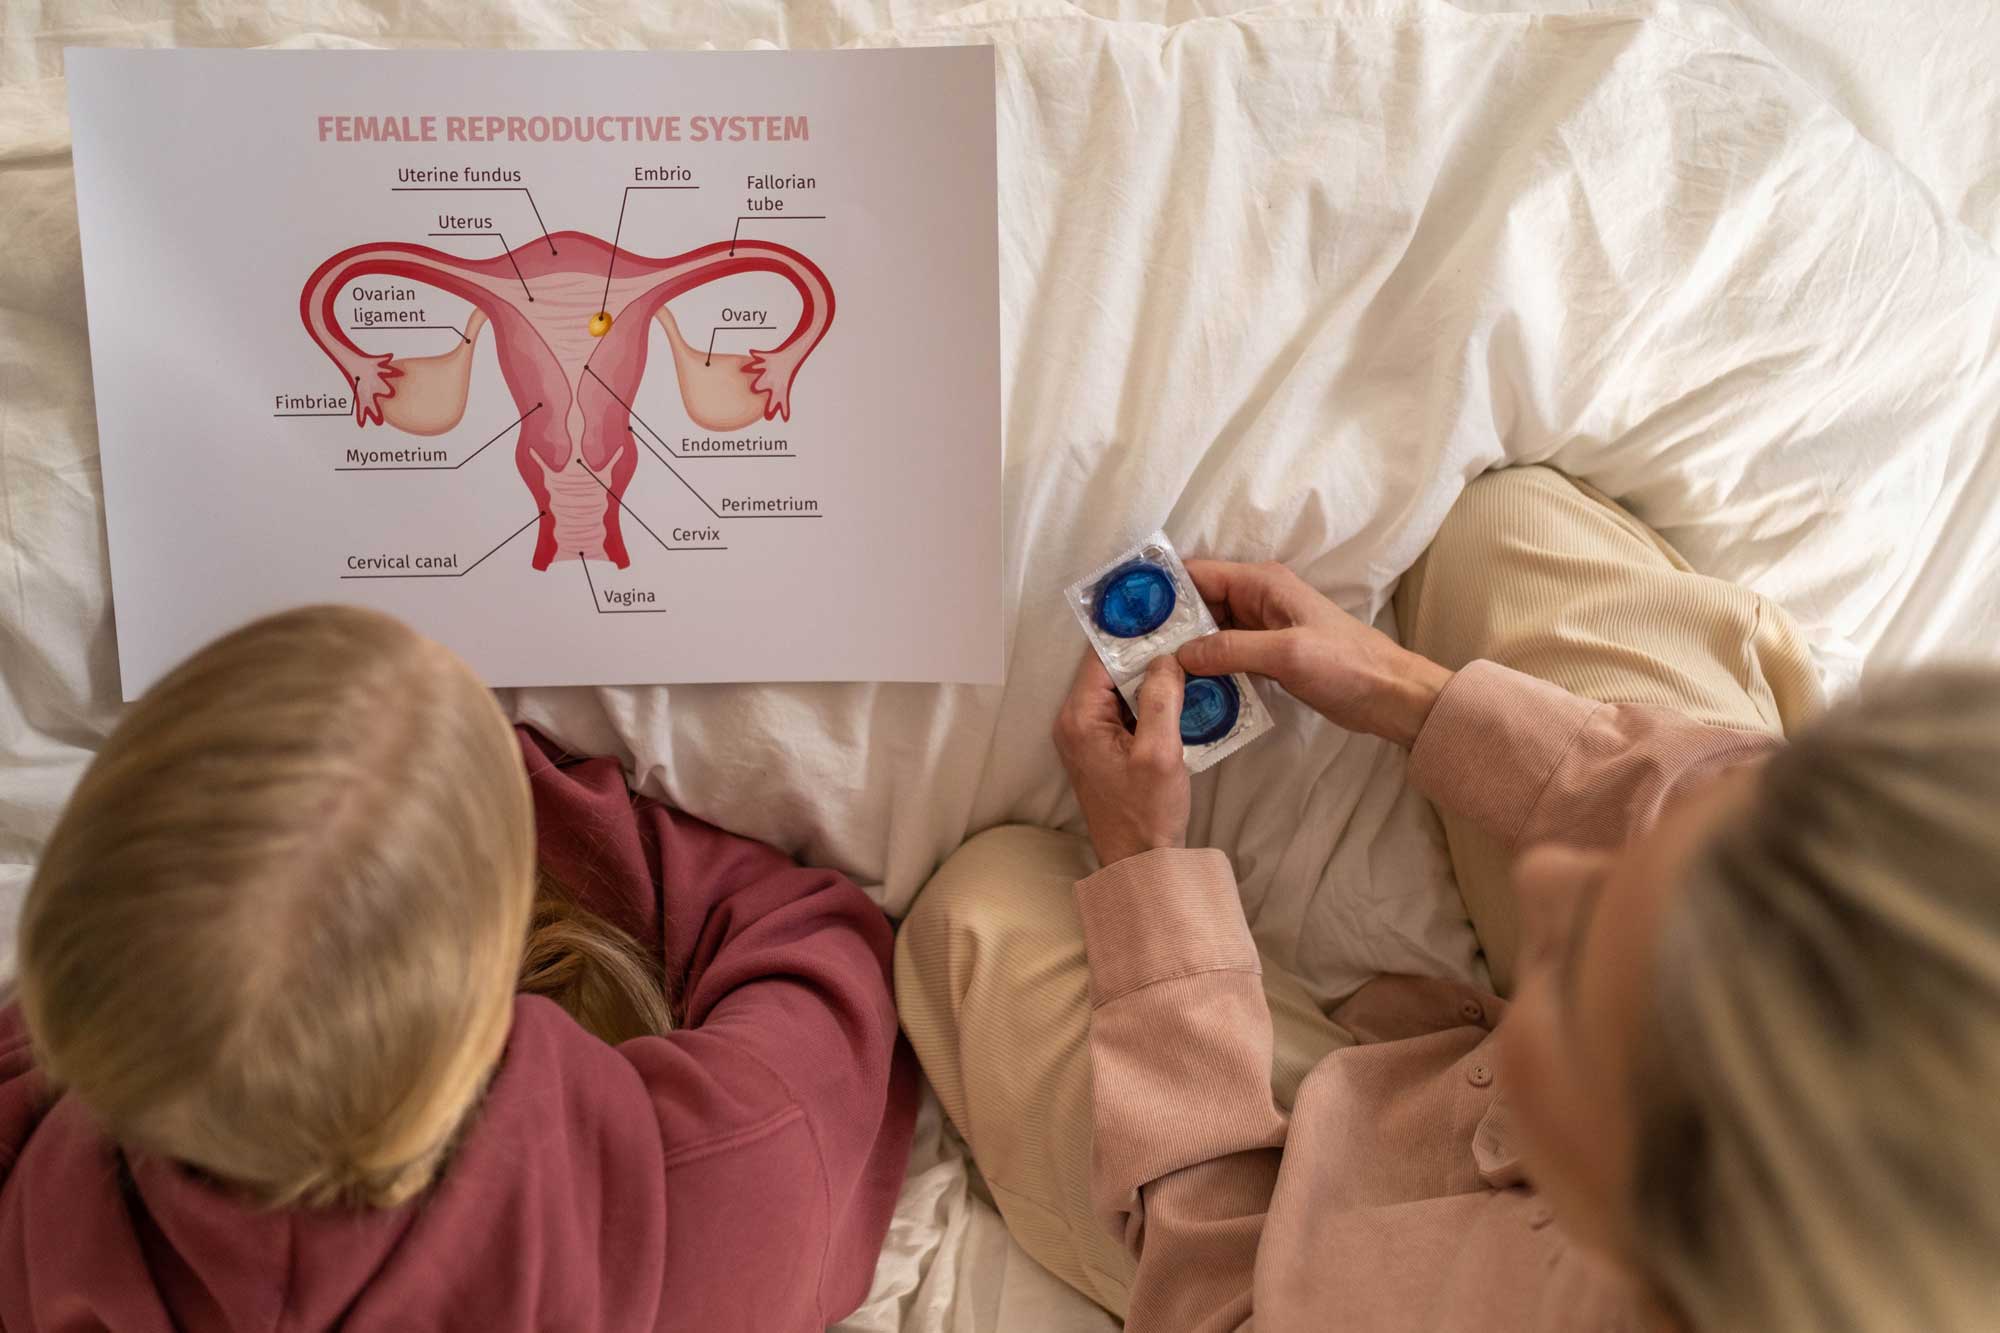 A mother and child sitting in bed looking at a chart of female reproductive anatomy